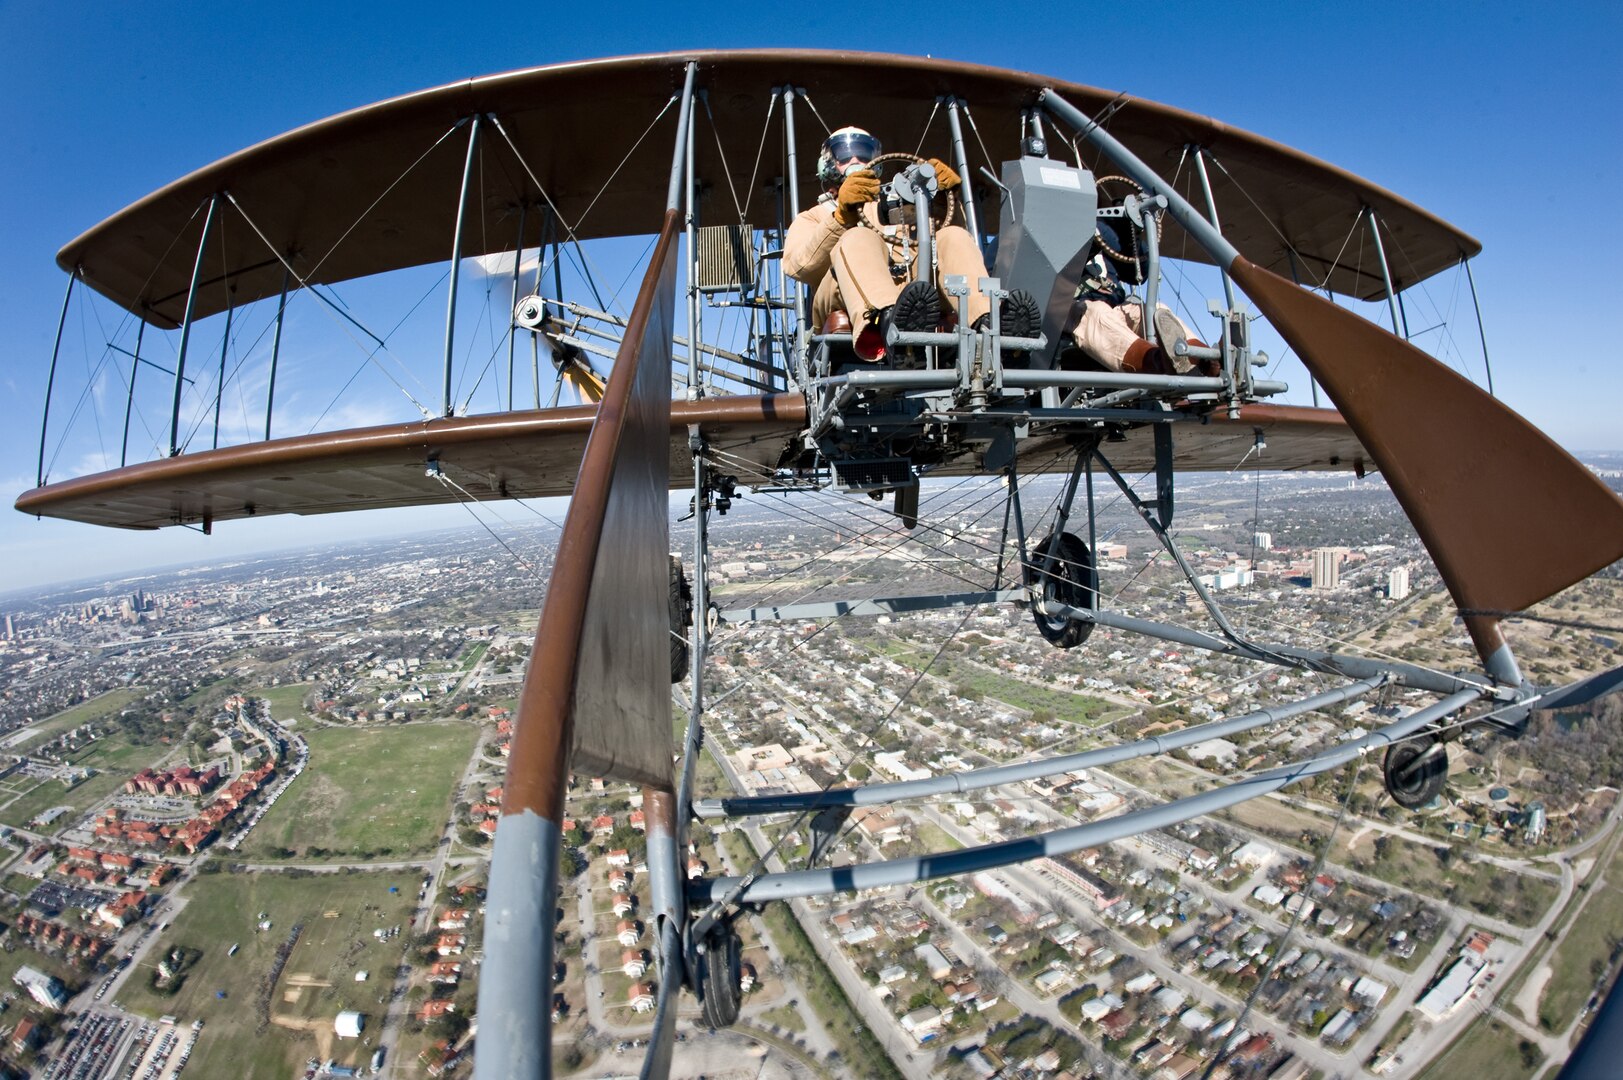 Rich Stepler and Don Stroud, Wright "B" Flyer pilots, performed a demonstration flight of their "Brown Bird" March 2, 2010, over MacArthur Parade Ground at Fort Sam Houston, Texas, during the Foulois Centennial Military Flight Celebration event.  (U.S. Air Force photo/Lance Cheung) 